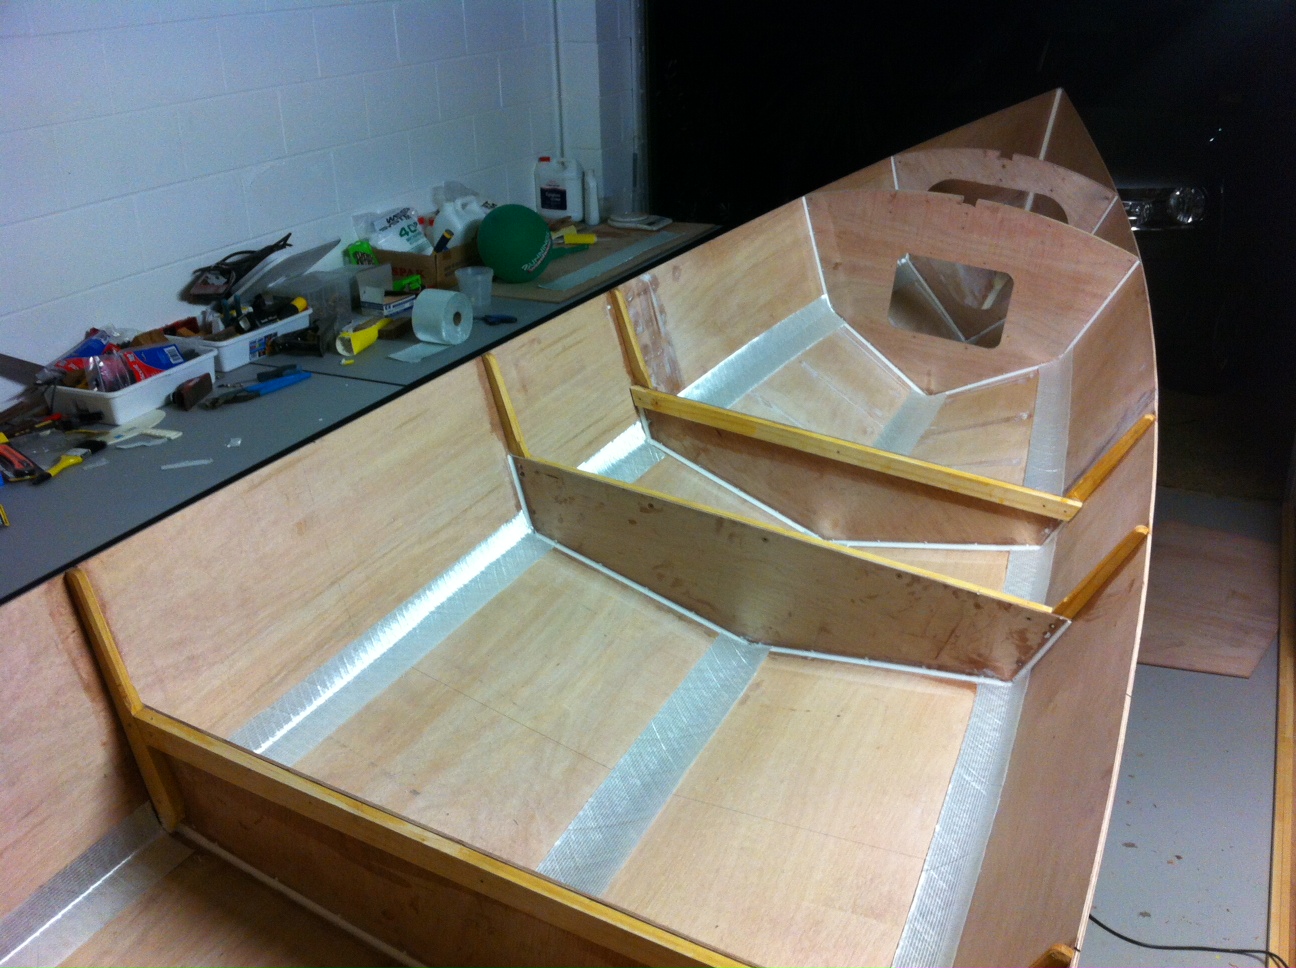 Will Shrapnel's boat being built using the stitch-and-glue method ...